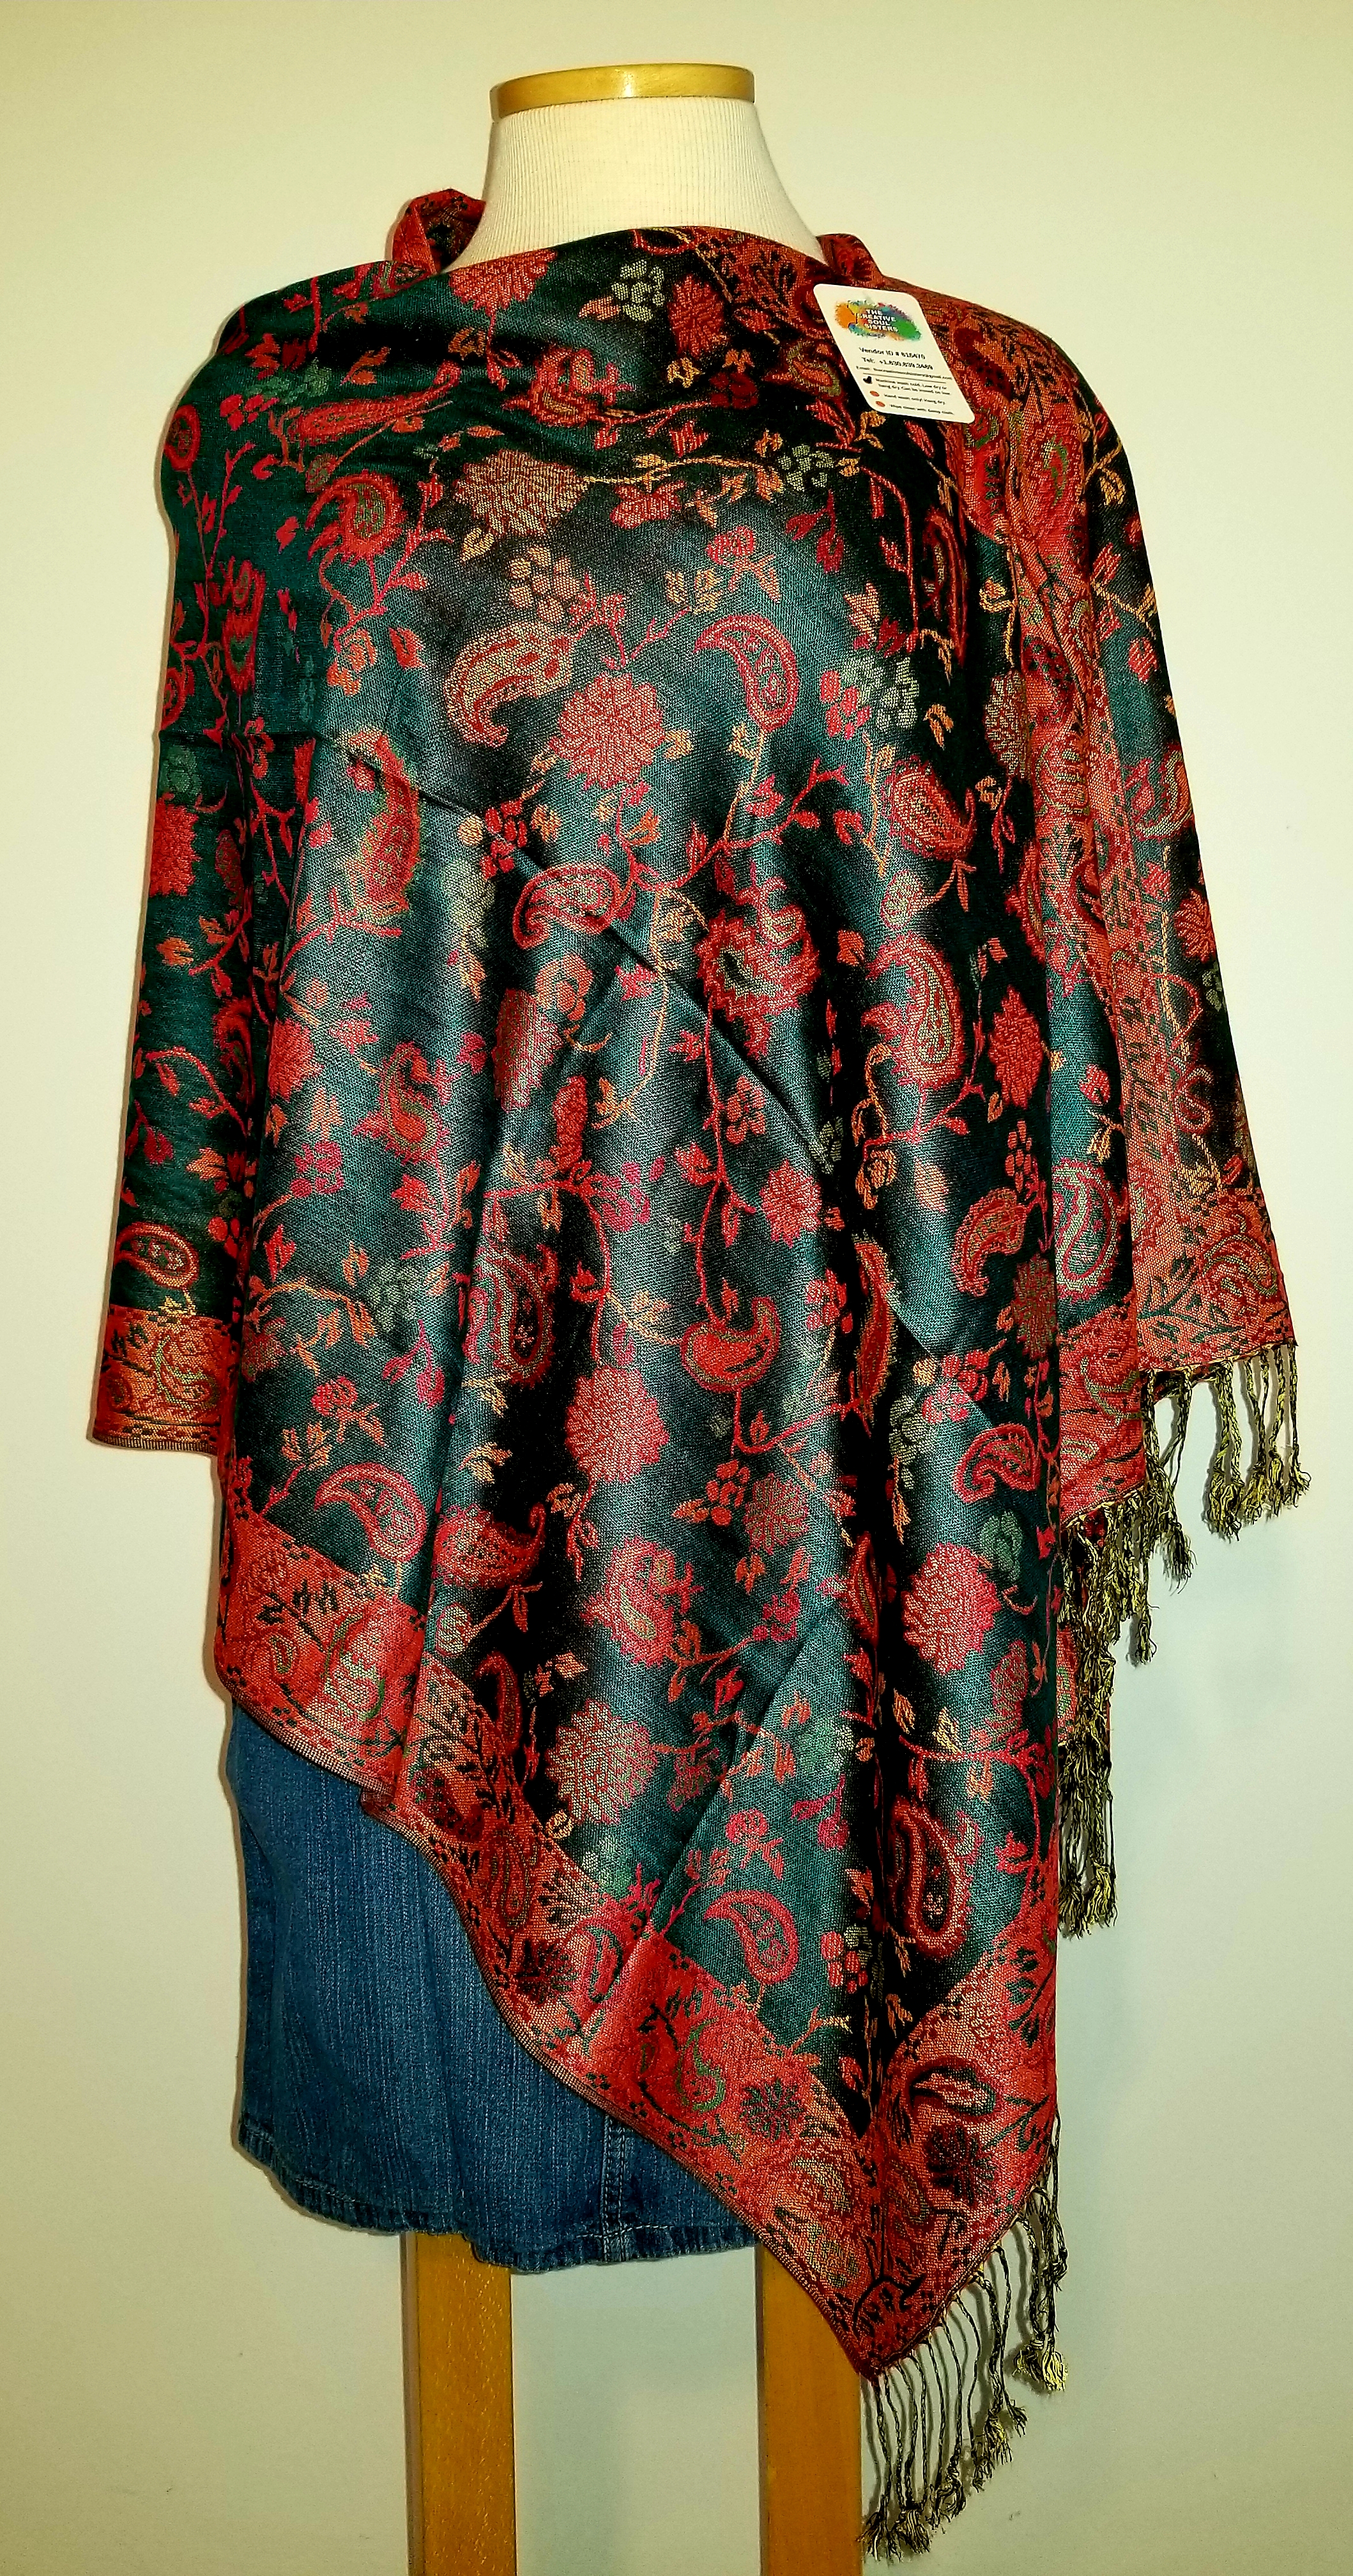 This Pumpkin and Teal Paisley Flower Popover Reversible Shawlmina Shawl- Silk Blend - Fits most is made with love by The Creative Soul Sisters! Shop more unique gift ideas today with Spots Initiatives, the best way to support creators.